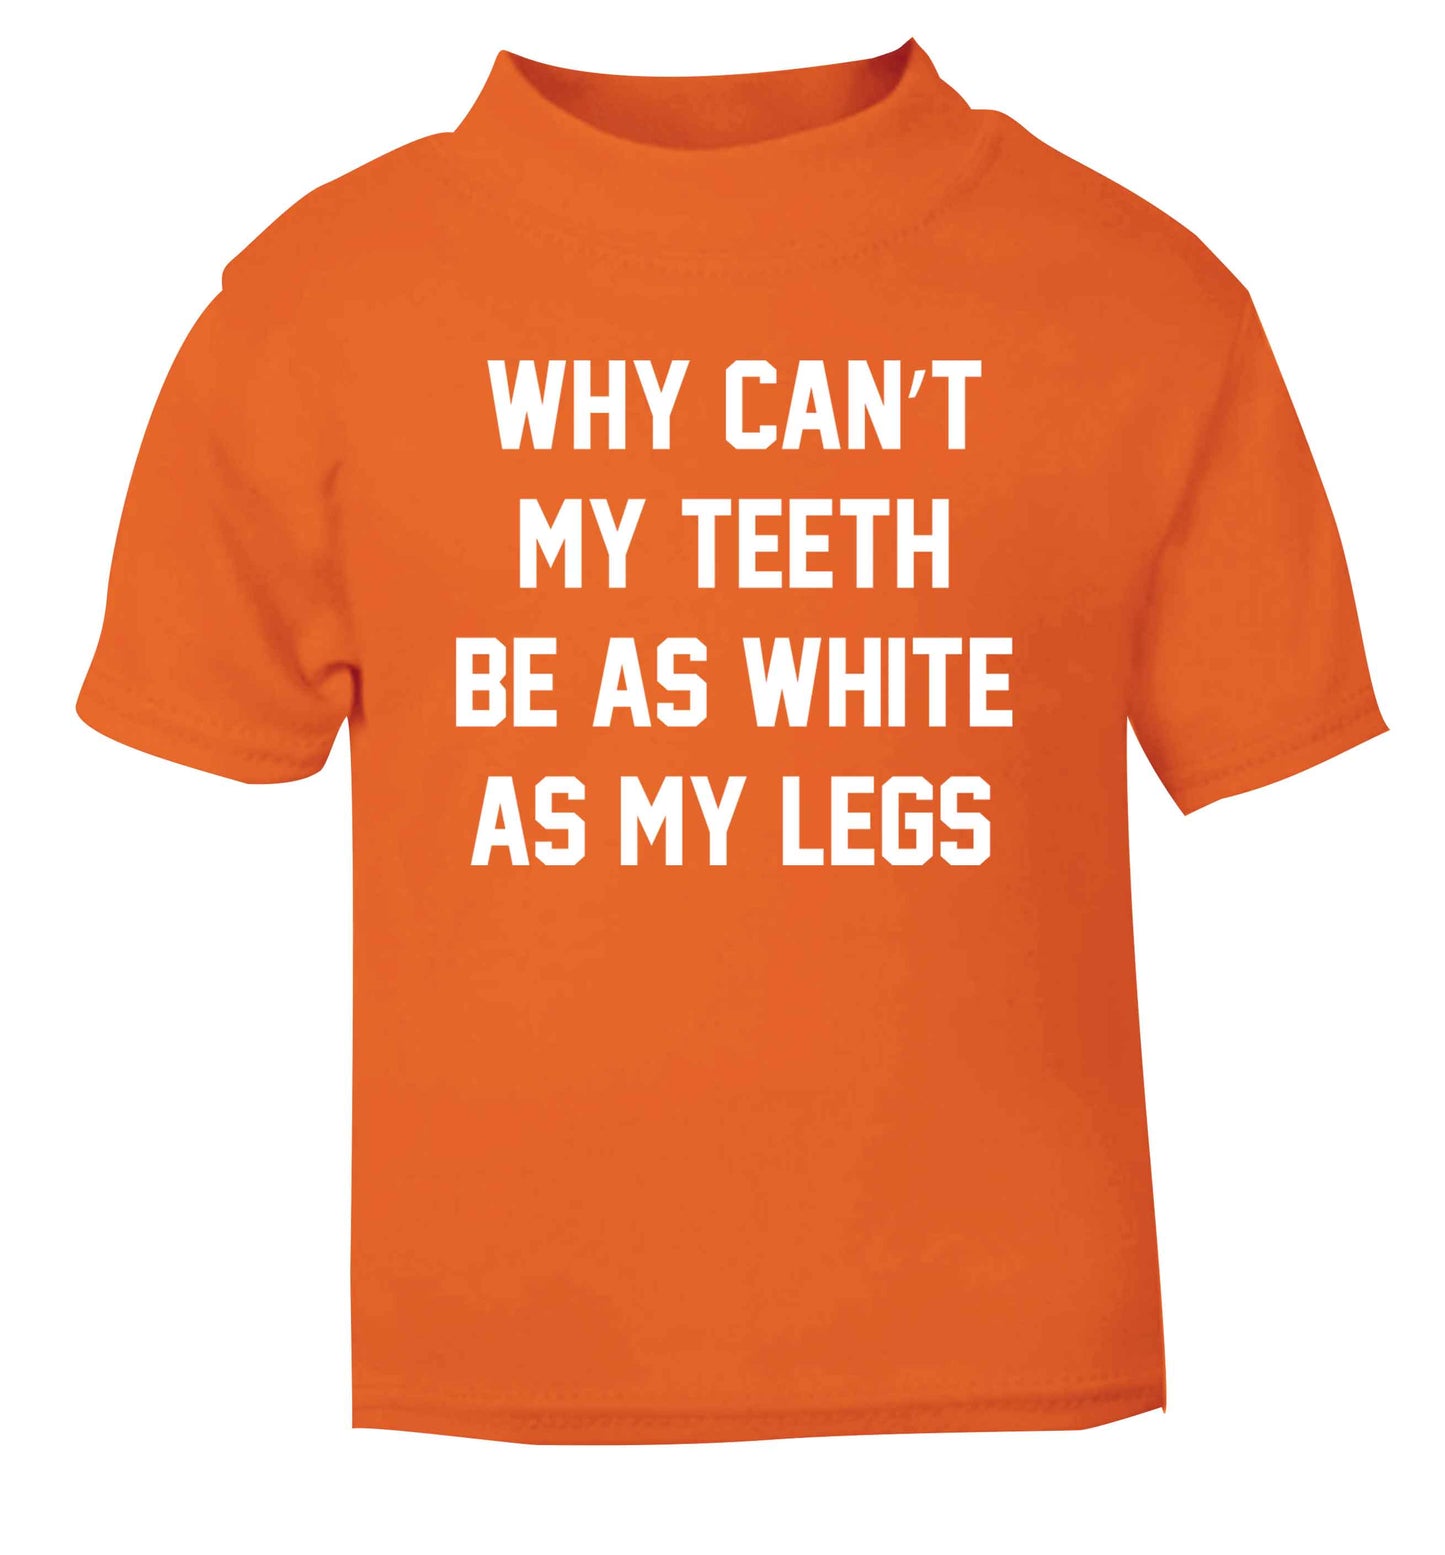 Why can't my teeth be as white as my legs orange Baby Toddler Tshirt 2 Years